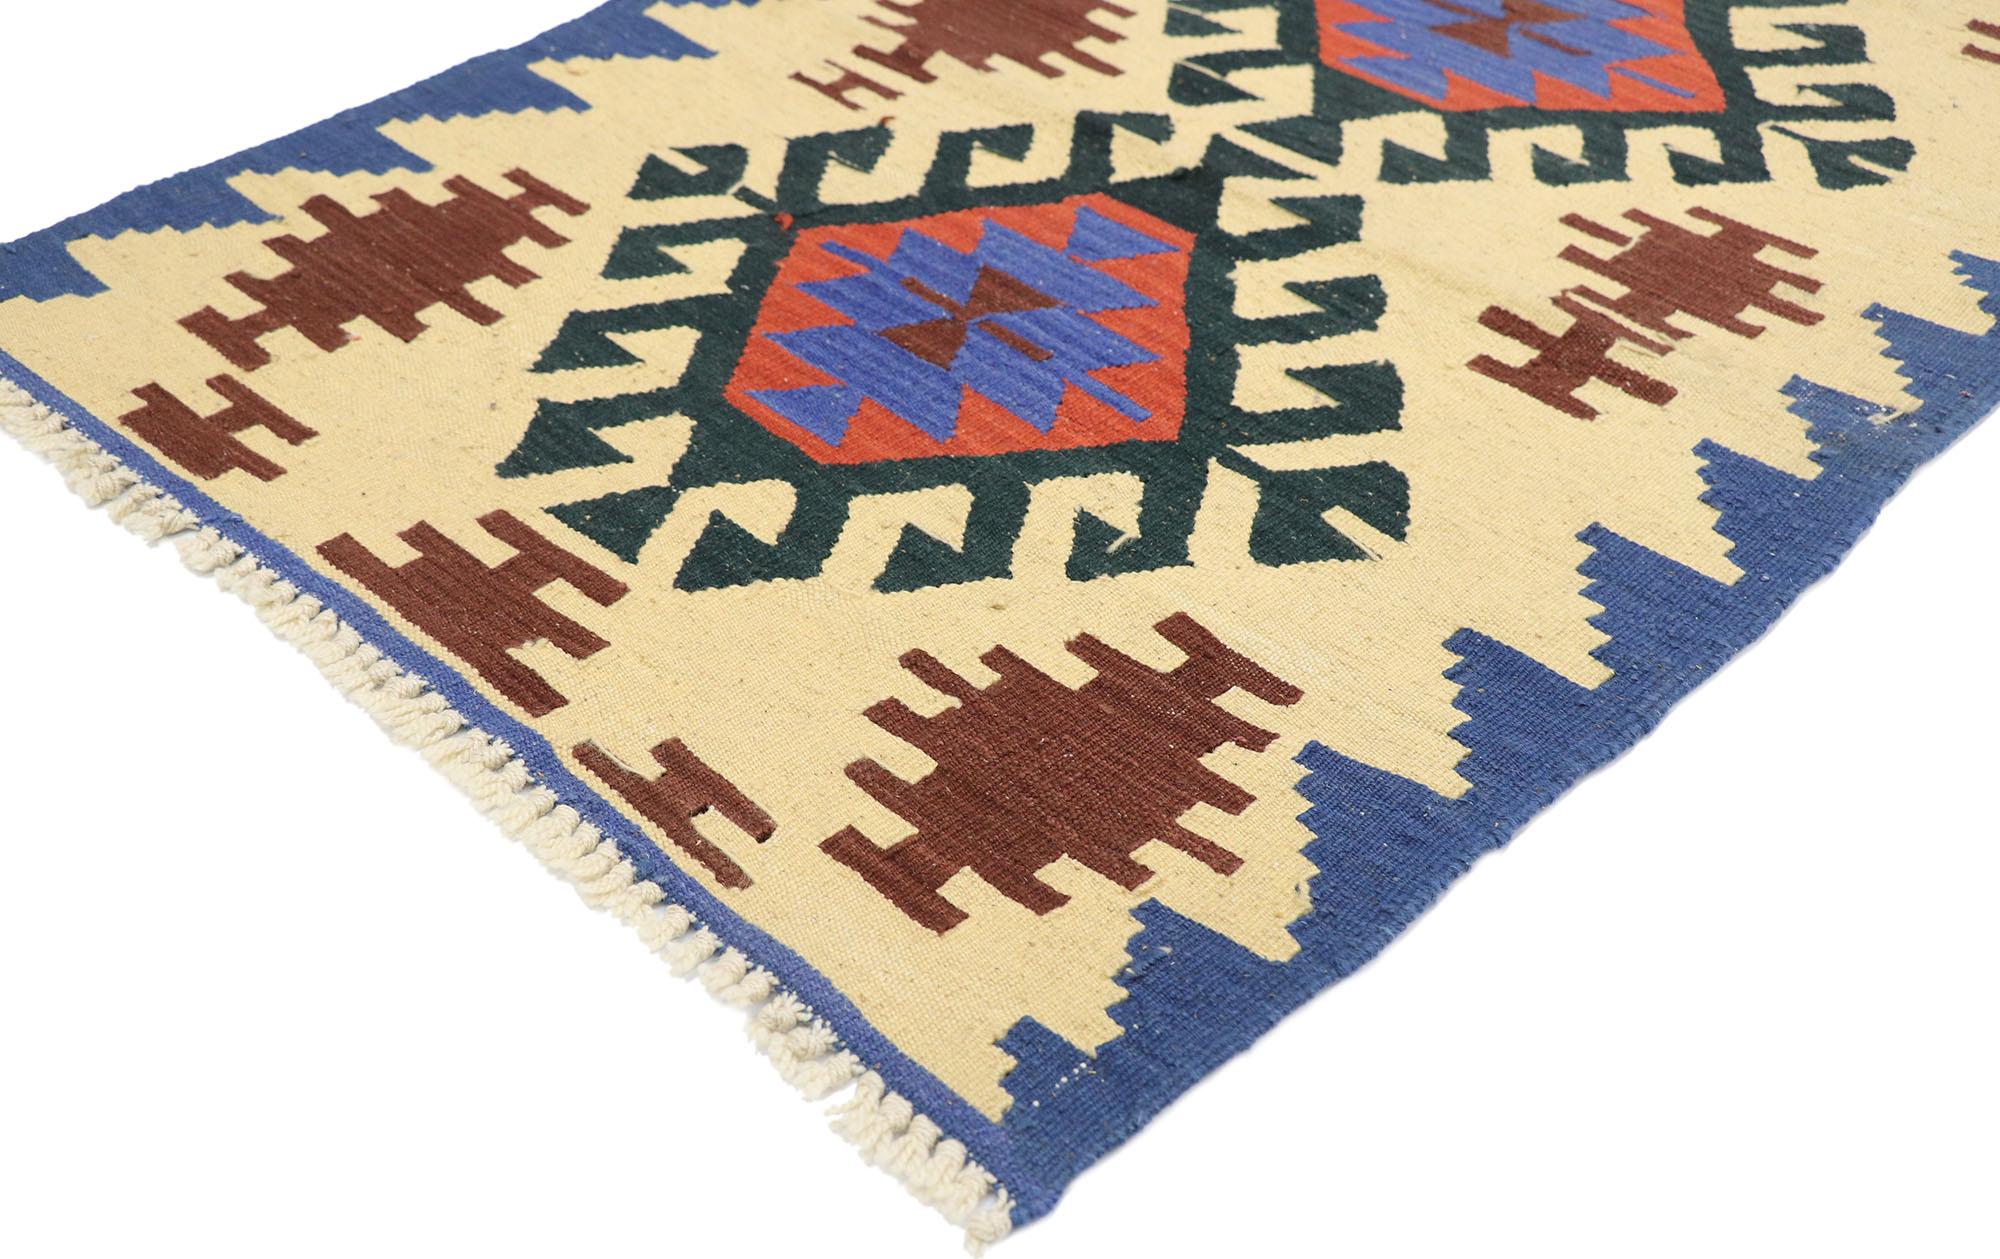 77916, vintage Persian Shiraz Kilim rug with Tribal style. Full of tiny details and a bold expressive design combined with vibrant colors and tribal style, this hand-woven wool vintage Persian Shiraz kilim rug is a captivating vision of woven